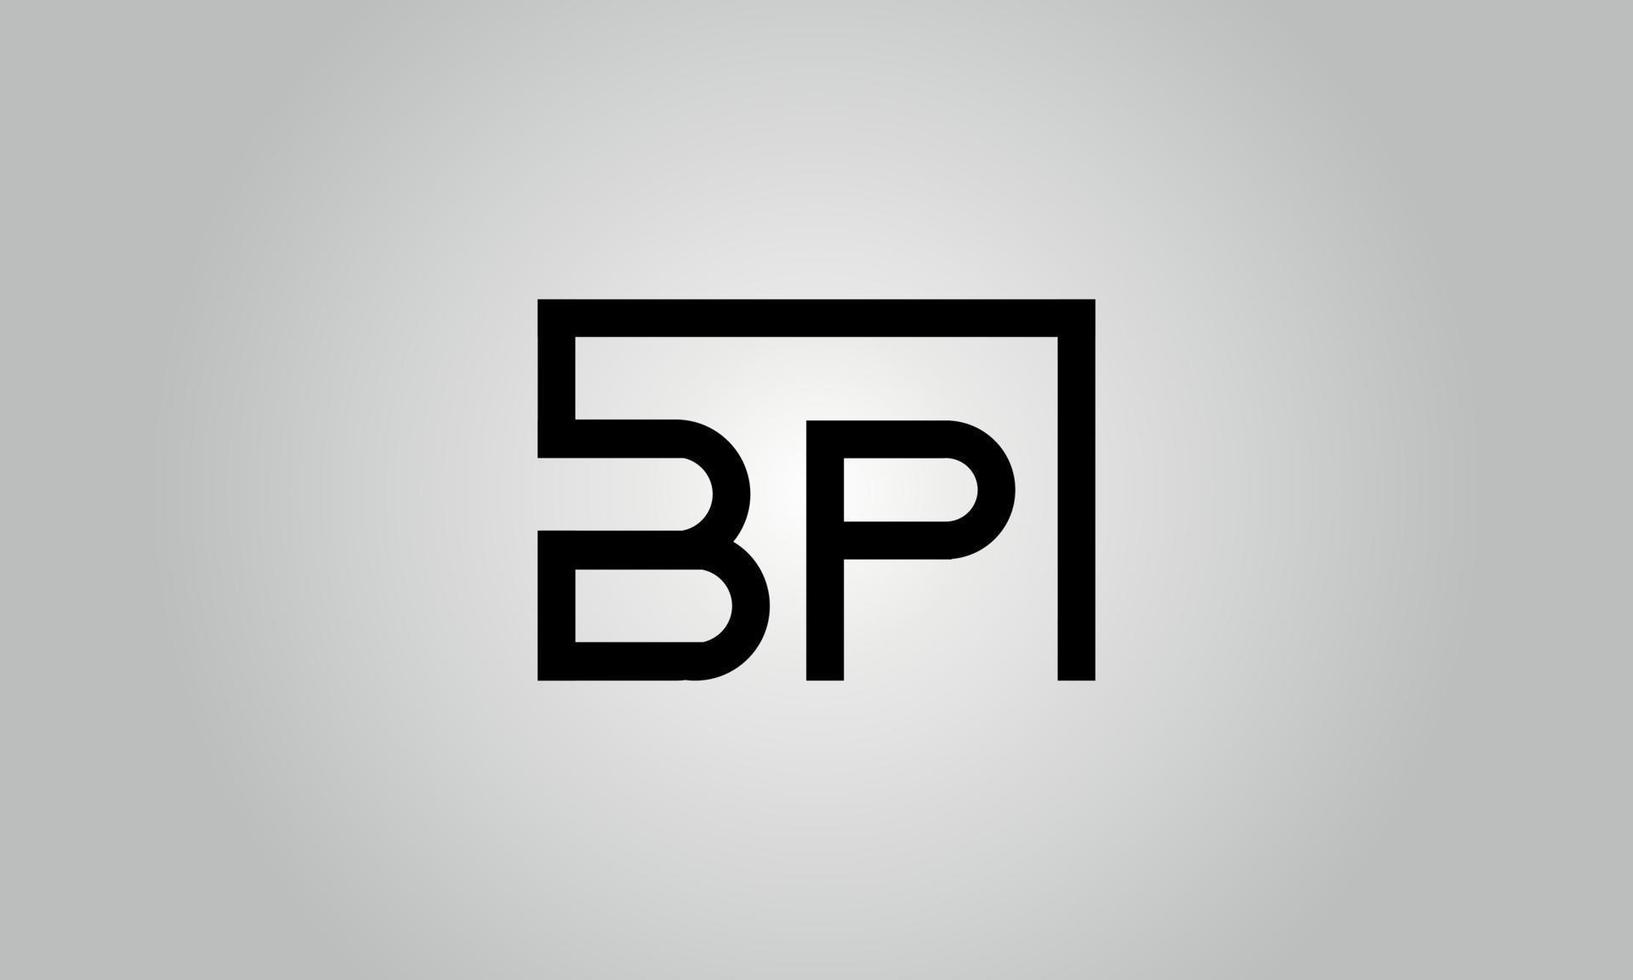 Letter BP logo design. BP logo with square shape in black colors vector free vector template.